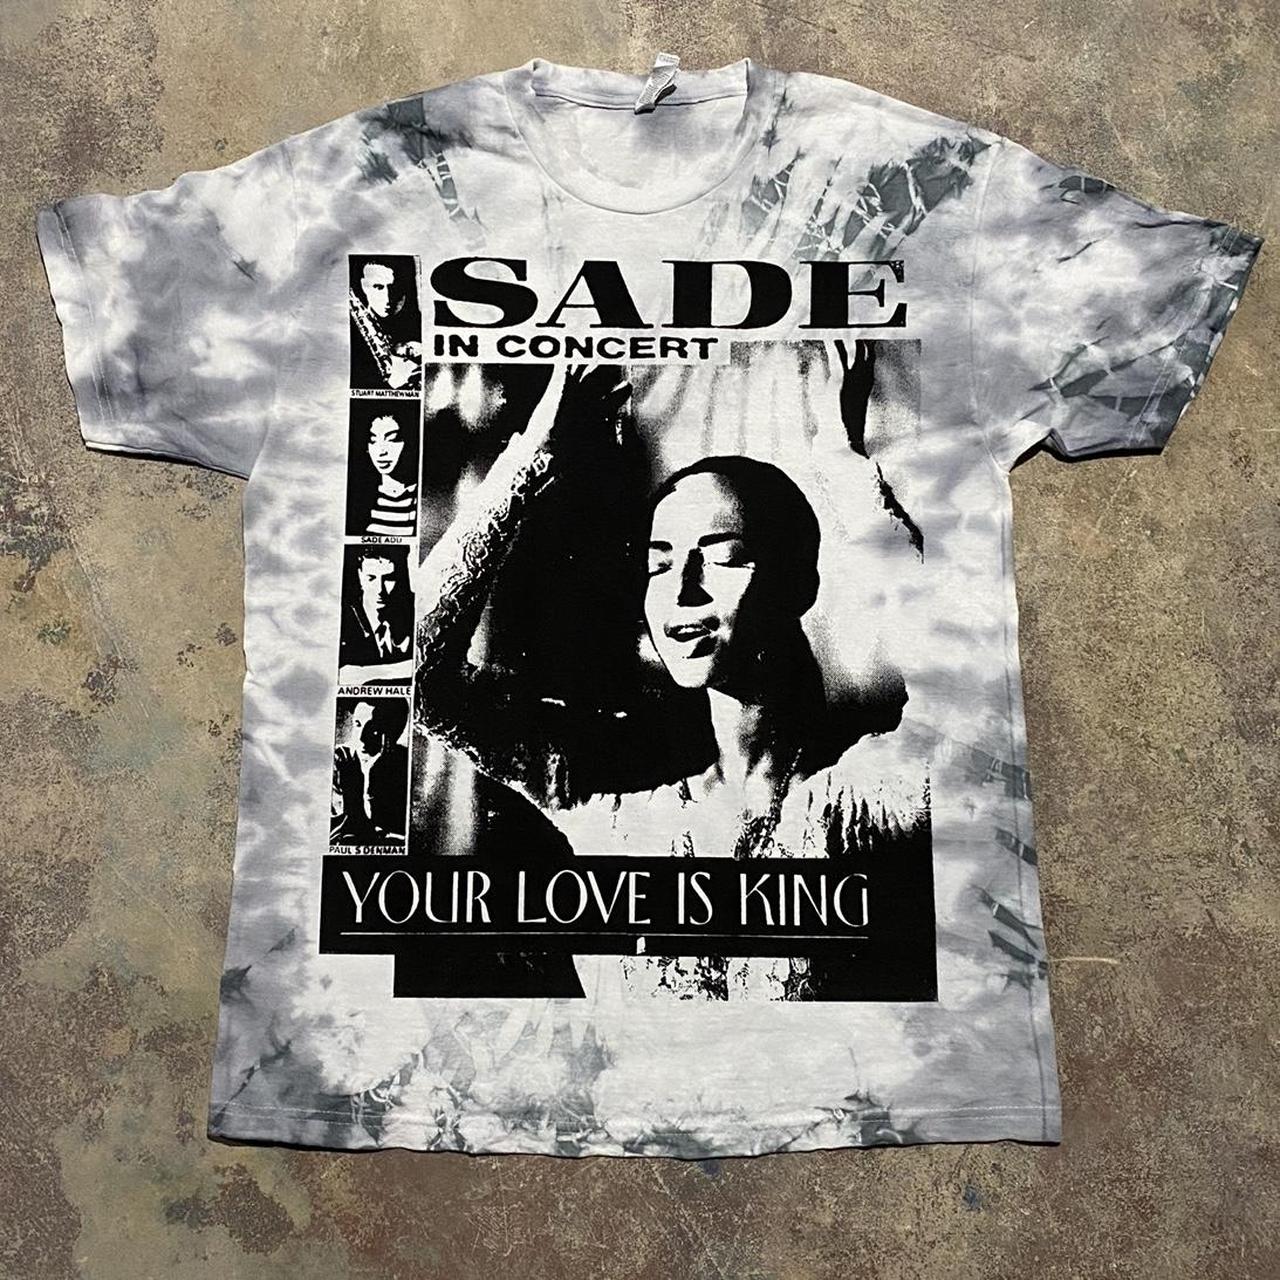 Your Love Is King Sade T-Shirt, your love is king - thirstymag.com